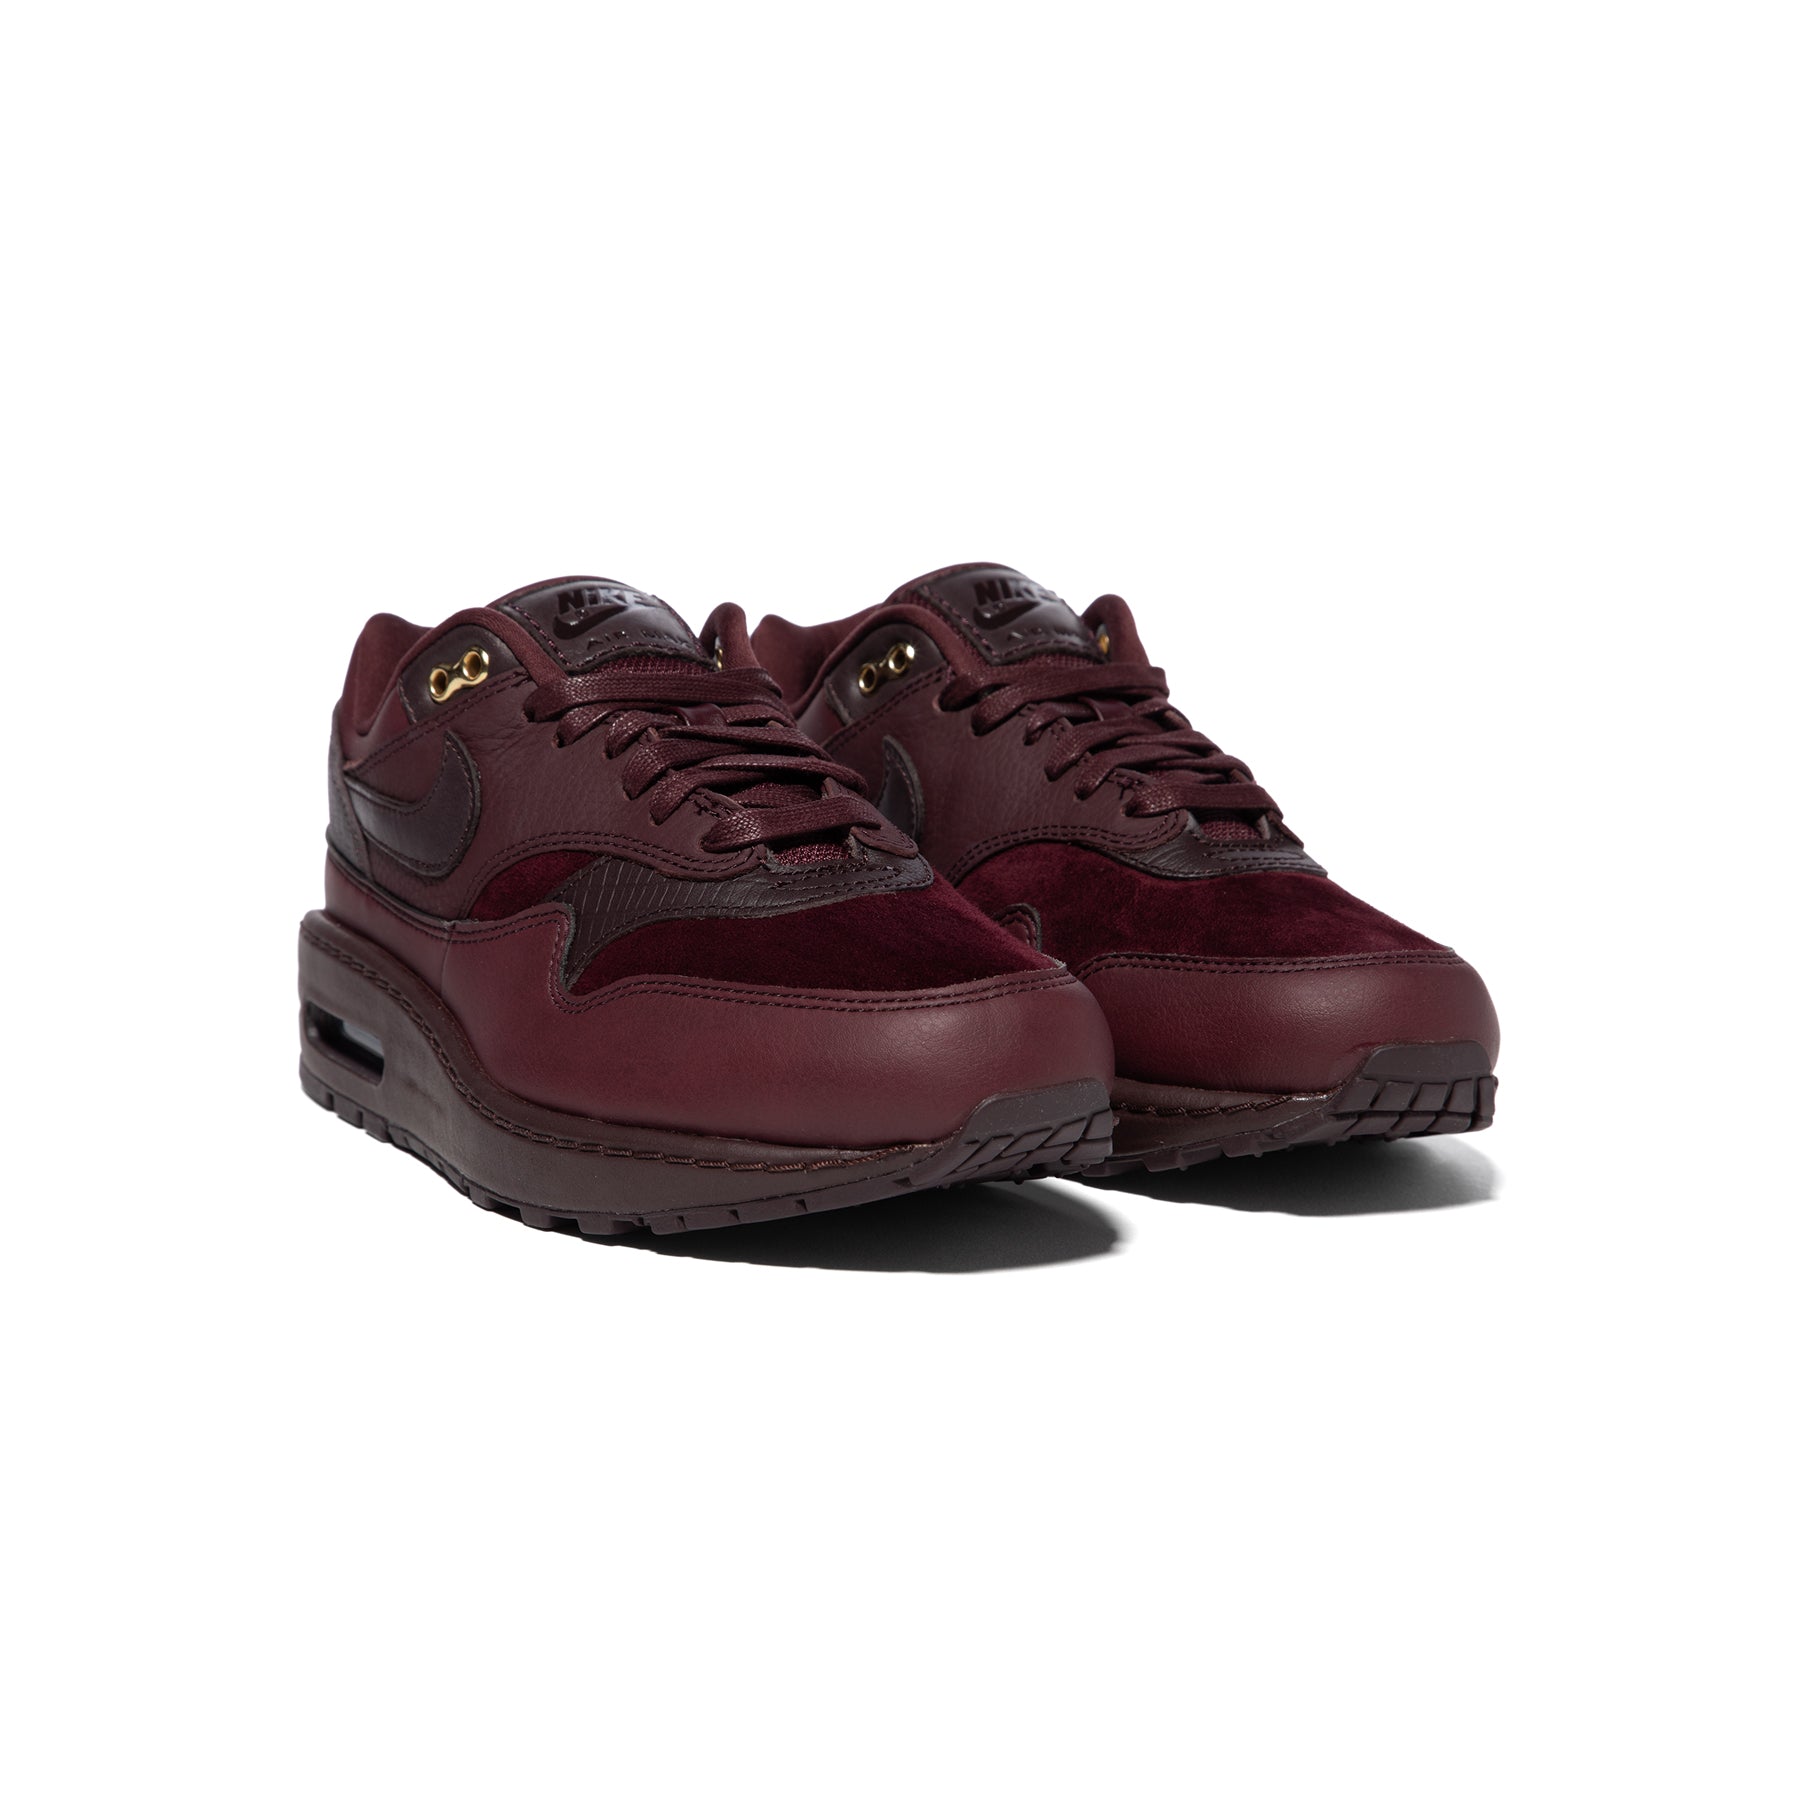 Oppervlakte Weiland aankomst Nike Womens Air Max 1 '87 NBHD (Burgundy Crush) – Concepts